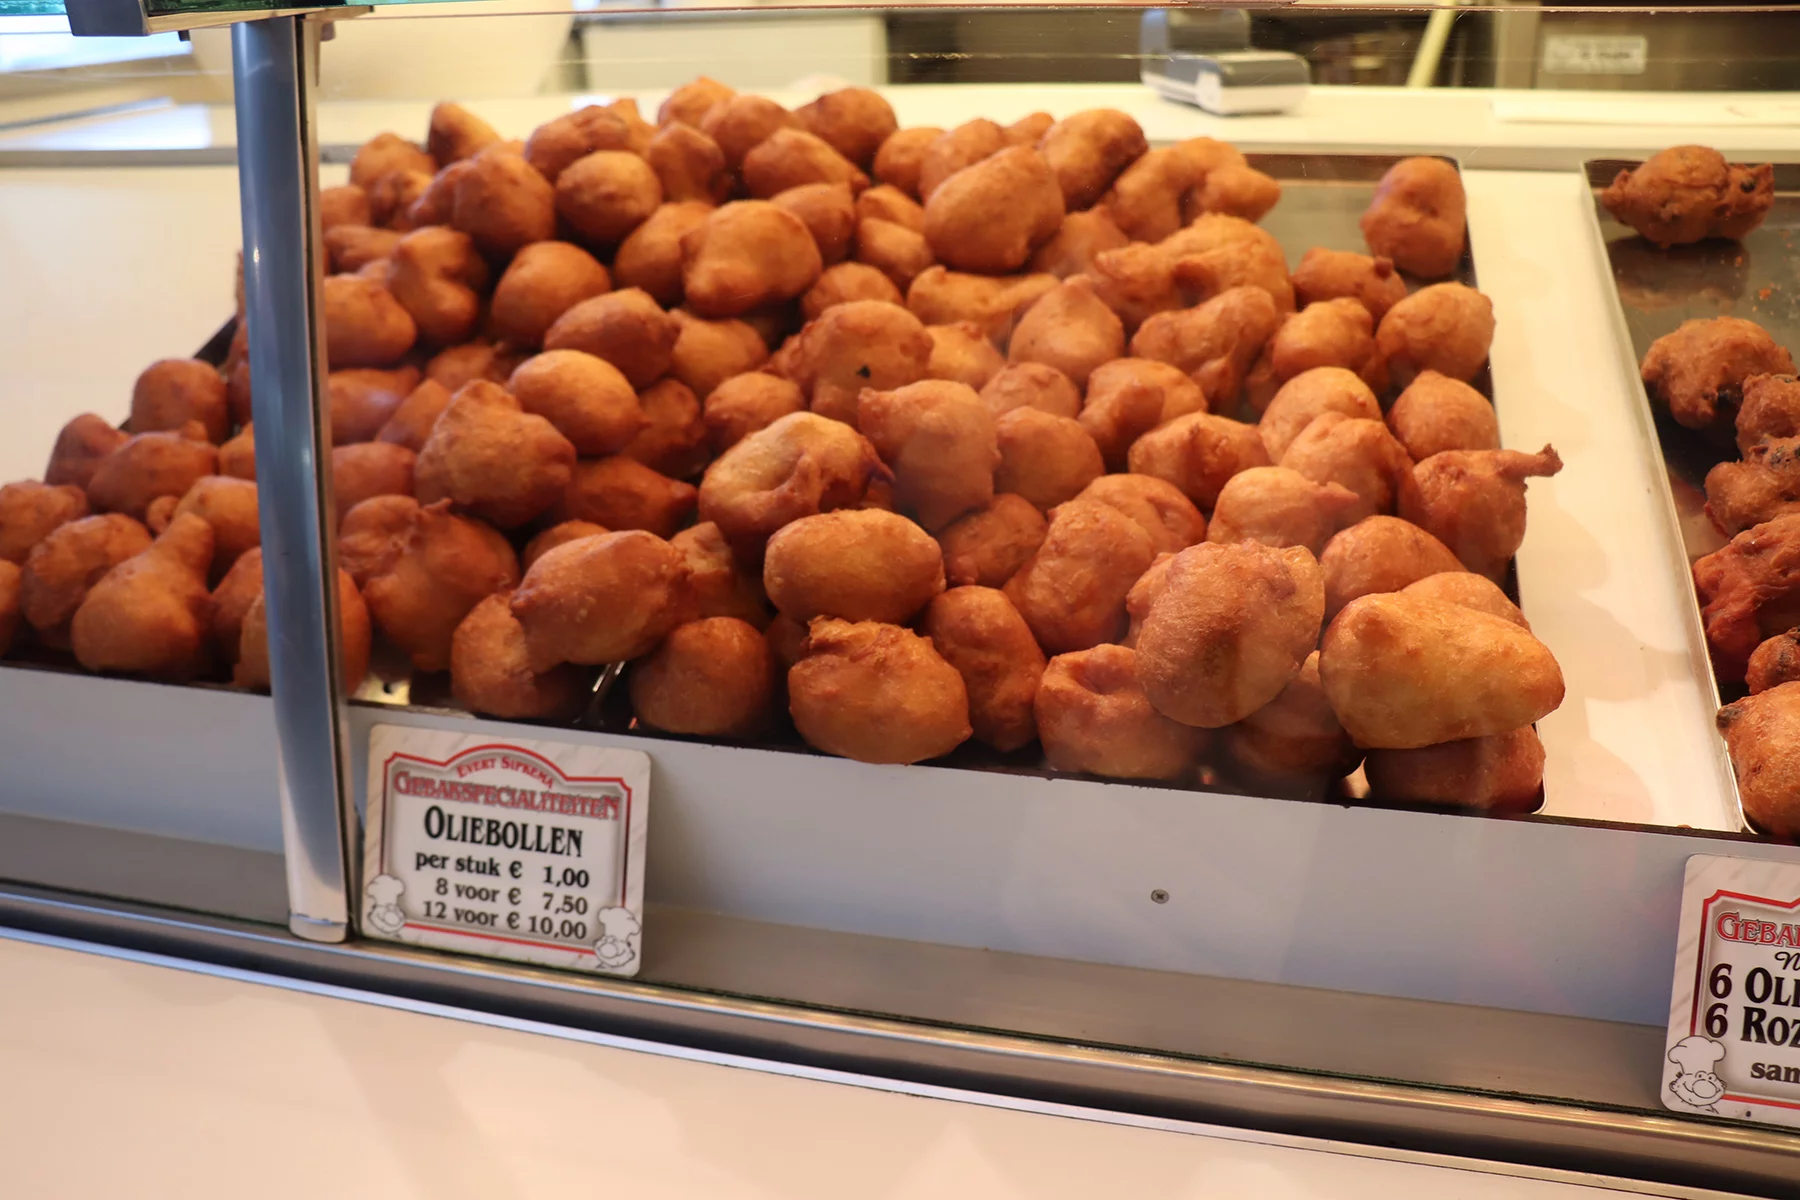 Oliebollen for sale at a truck in Aalsmeer